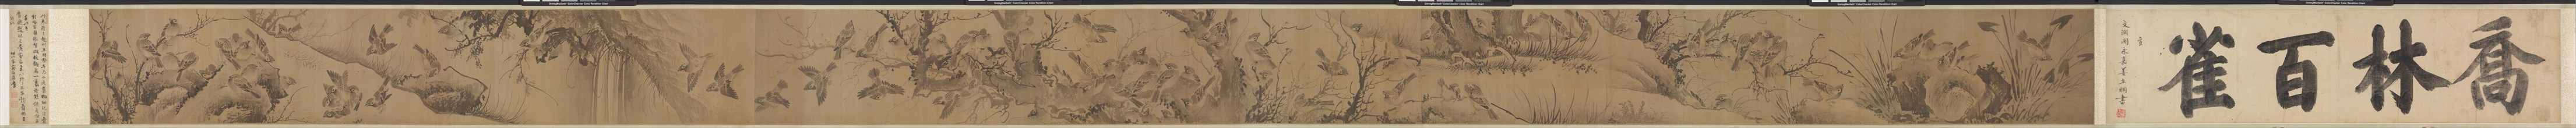 A Hundred Sparrows in a Lofty Grove  (Qiaolin baique tu), 1368-1644. Attributed to Lin Liang